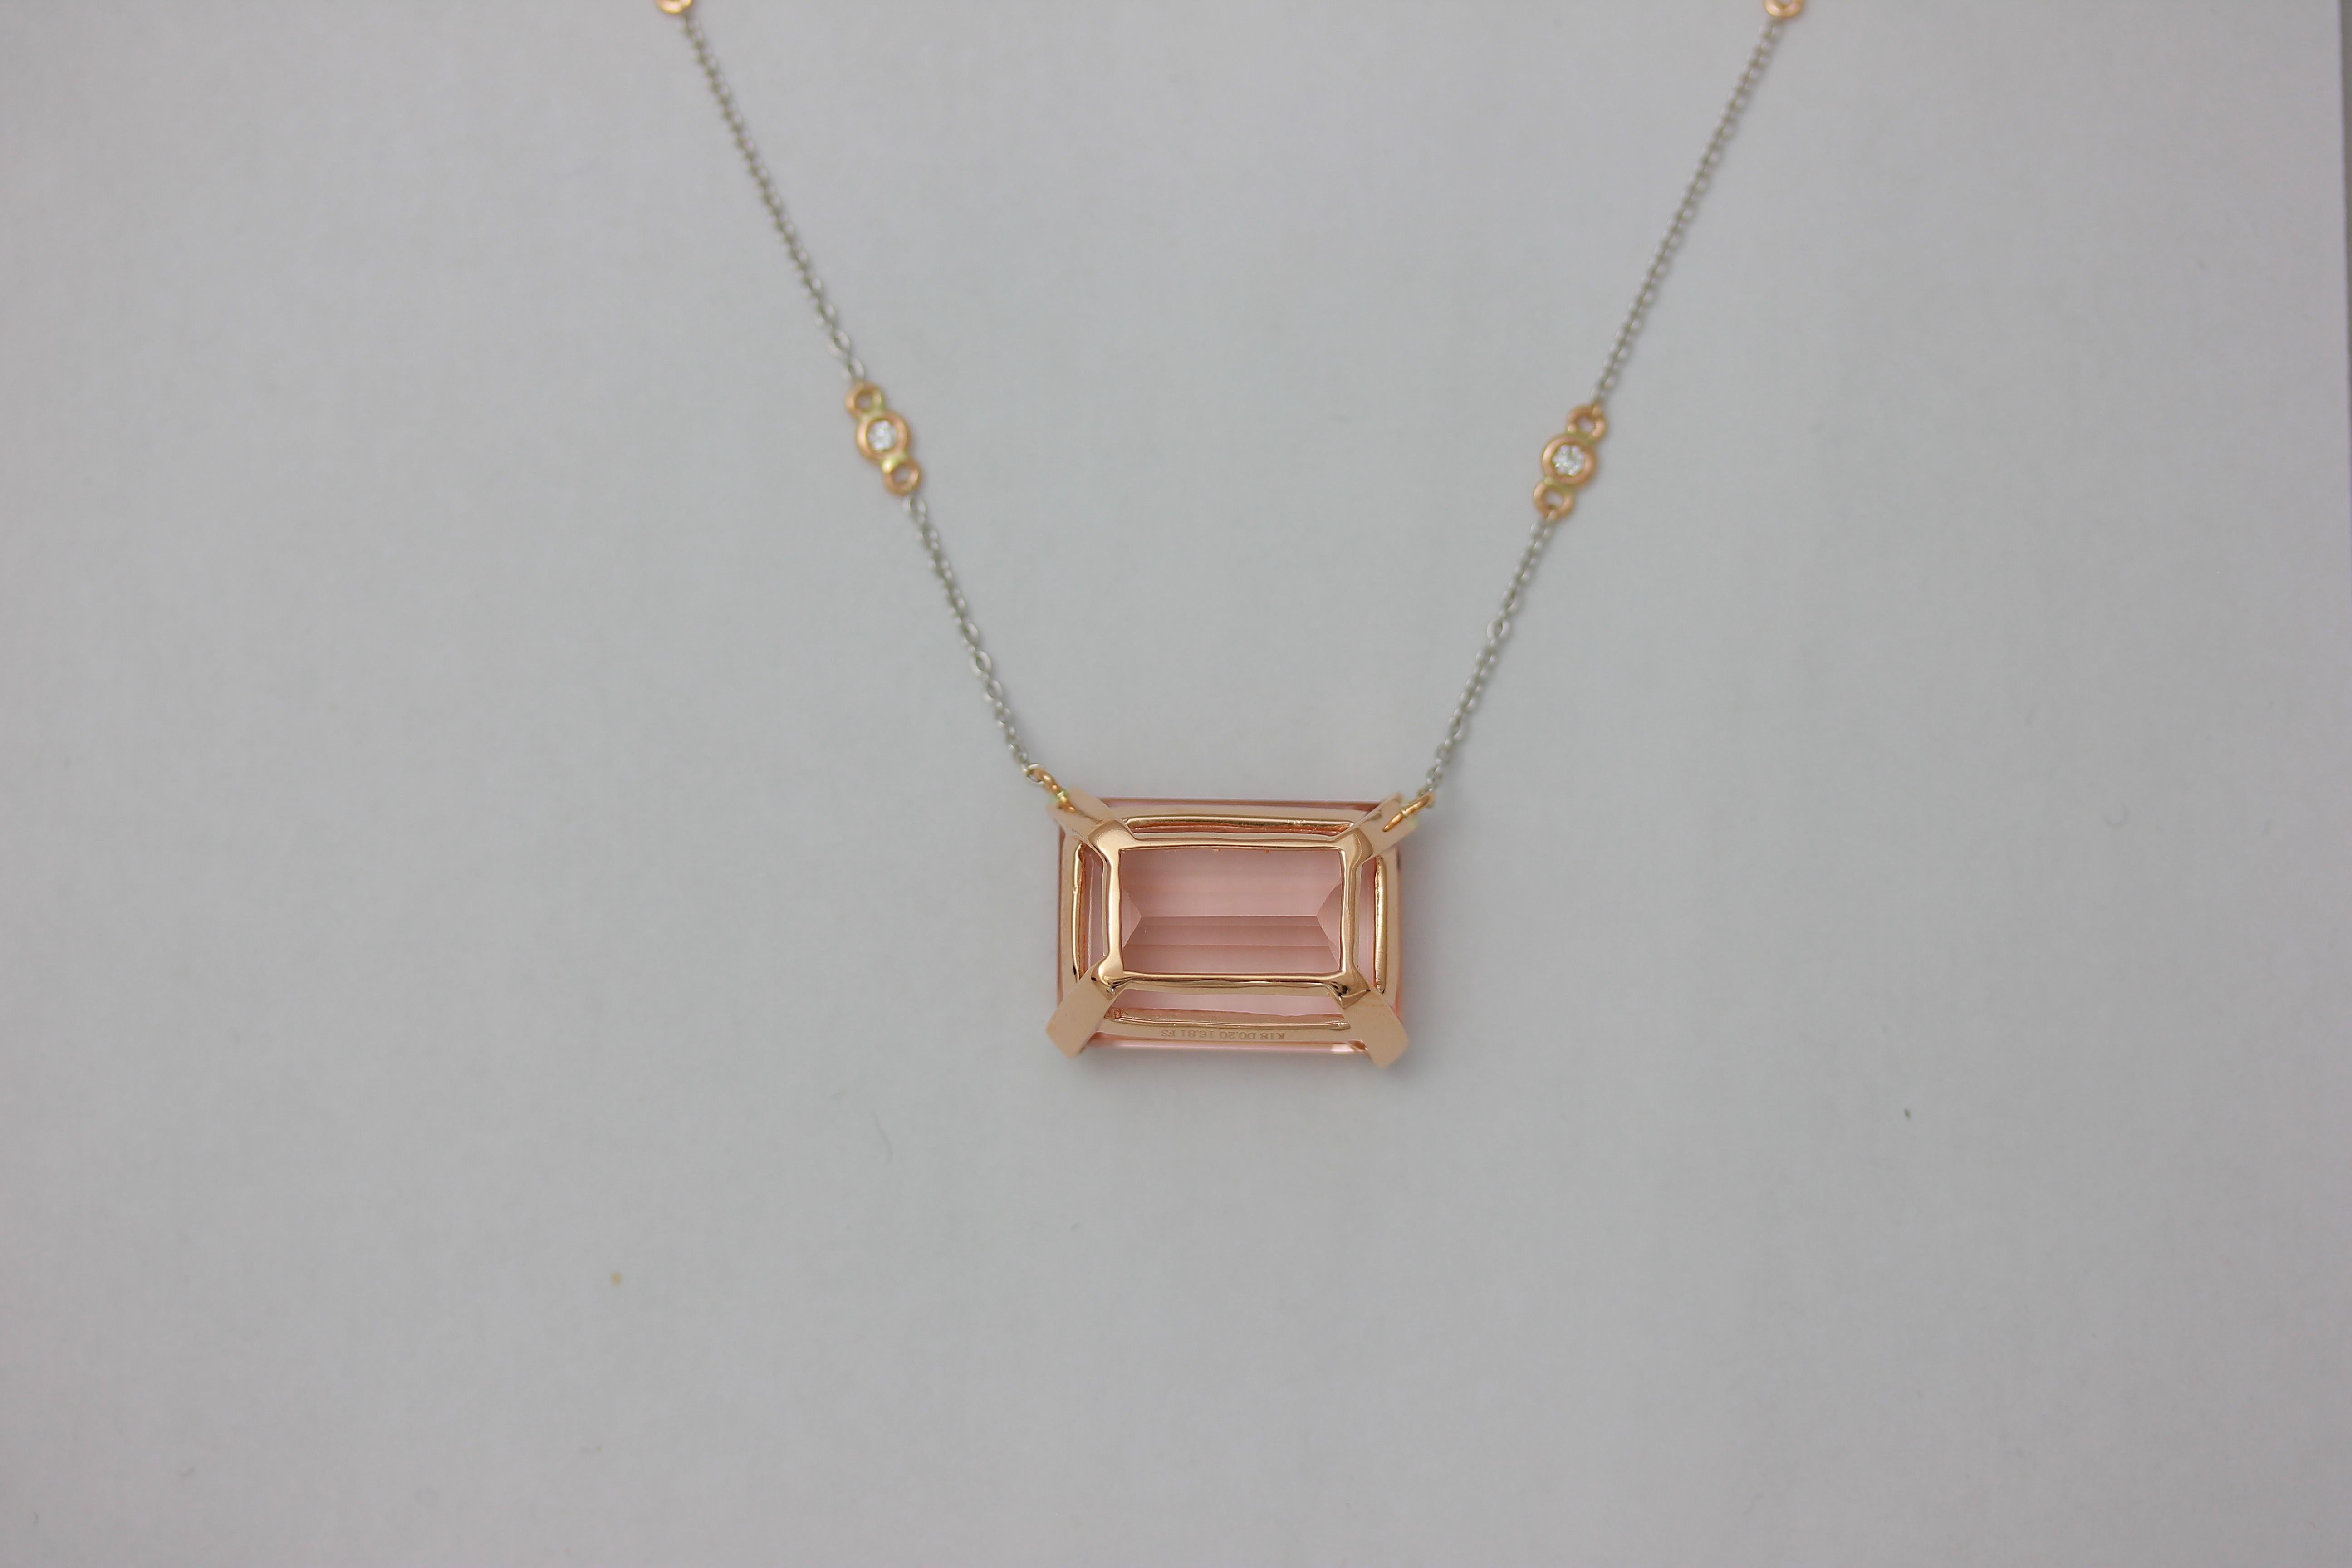 Contemporary Frederic Sage 16.81 Carat Morganite and Diamond One of Kind Pendant with Chain For Sale